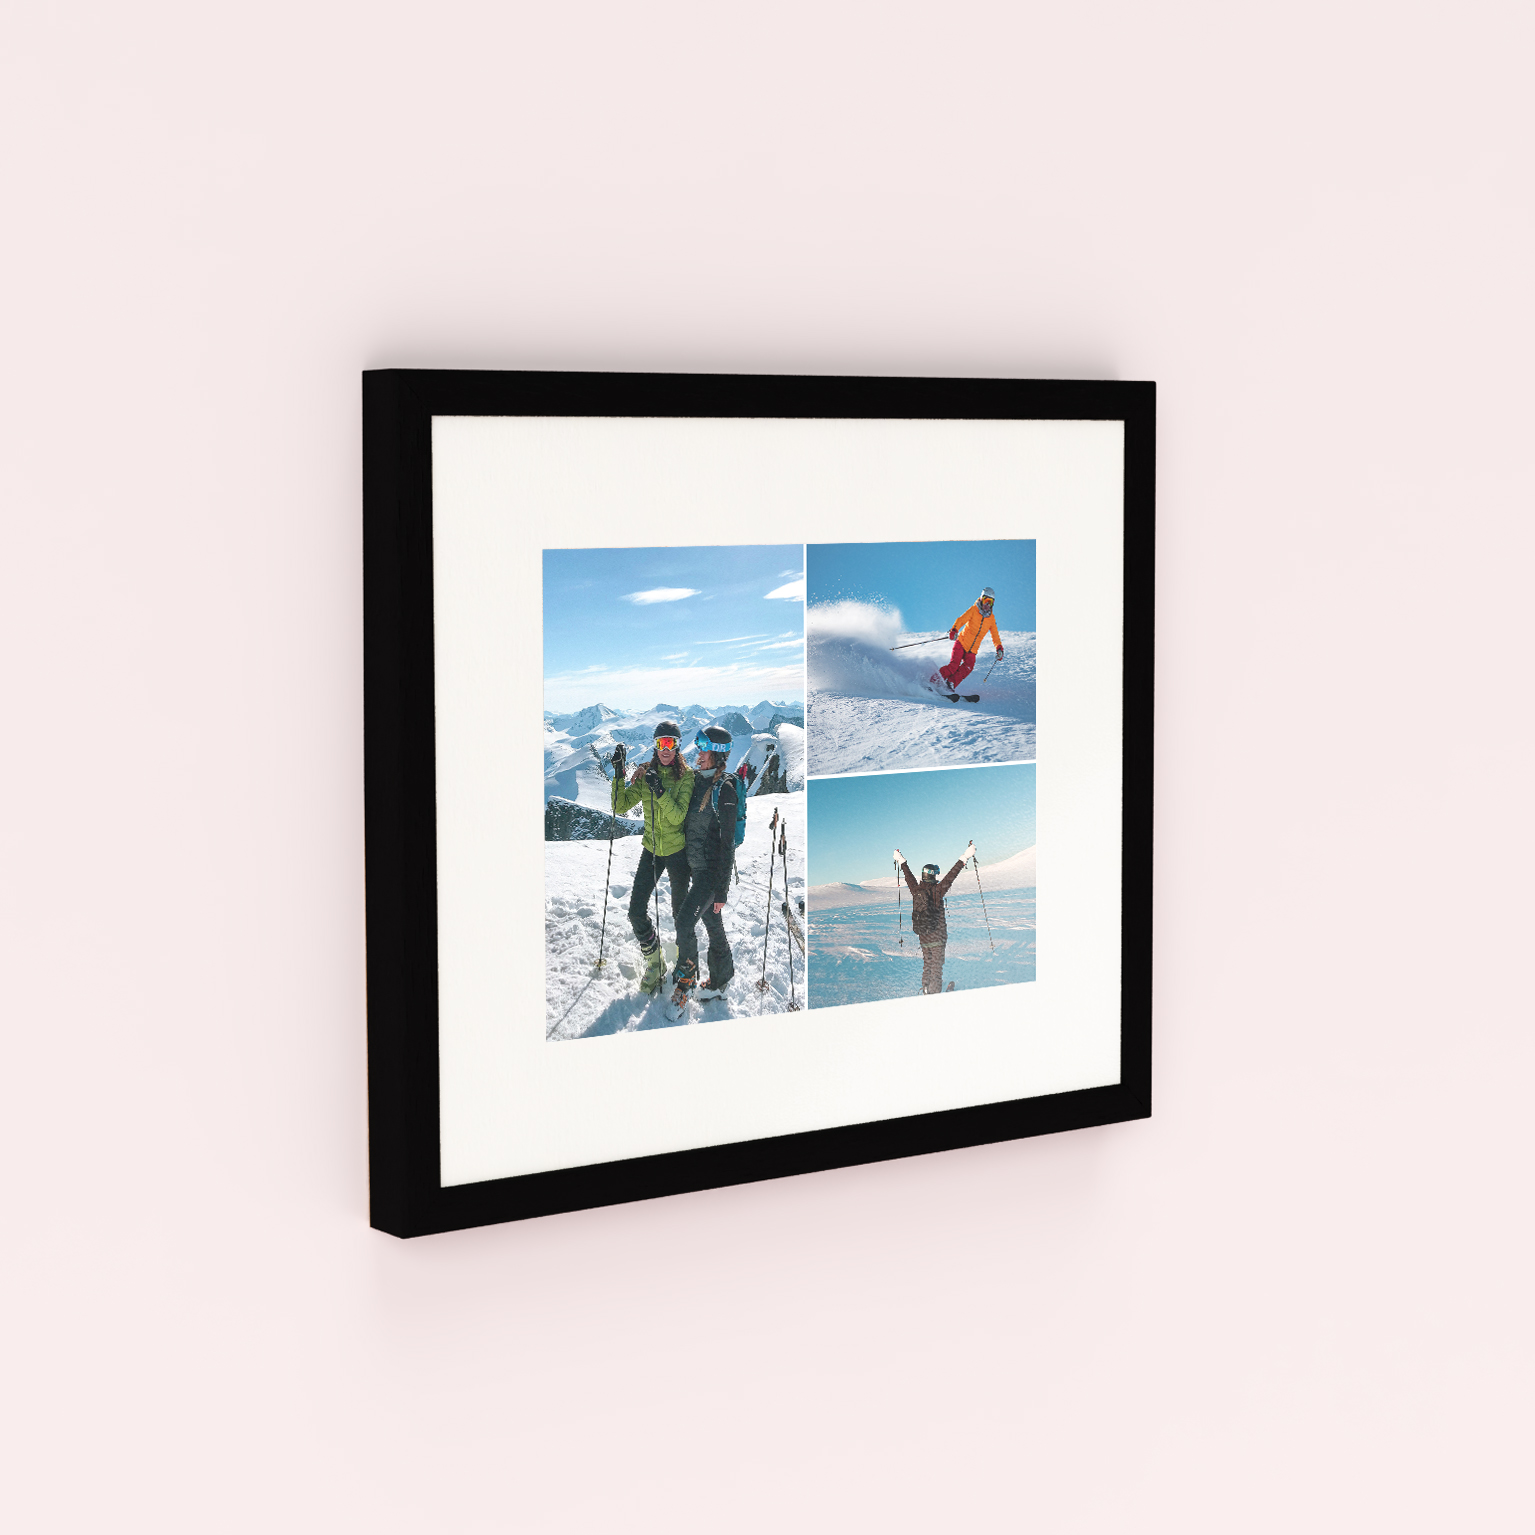 3 Part Collage Framed Photo Prints - Elegantly display three cherished moments in a cream frame, crafted with high-quality Fujifilm photo paper and eco-friendly wood, ready to hang for a sophisticated and durable display.